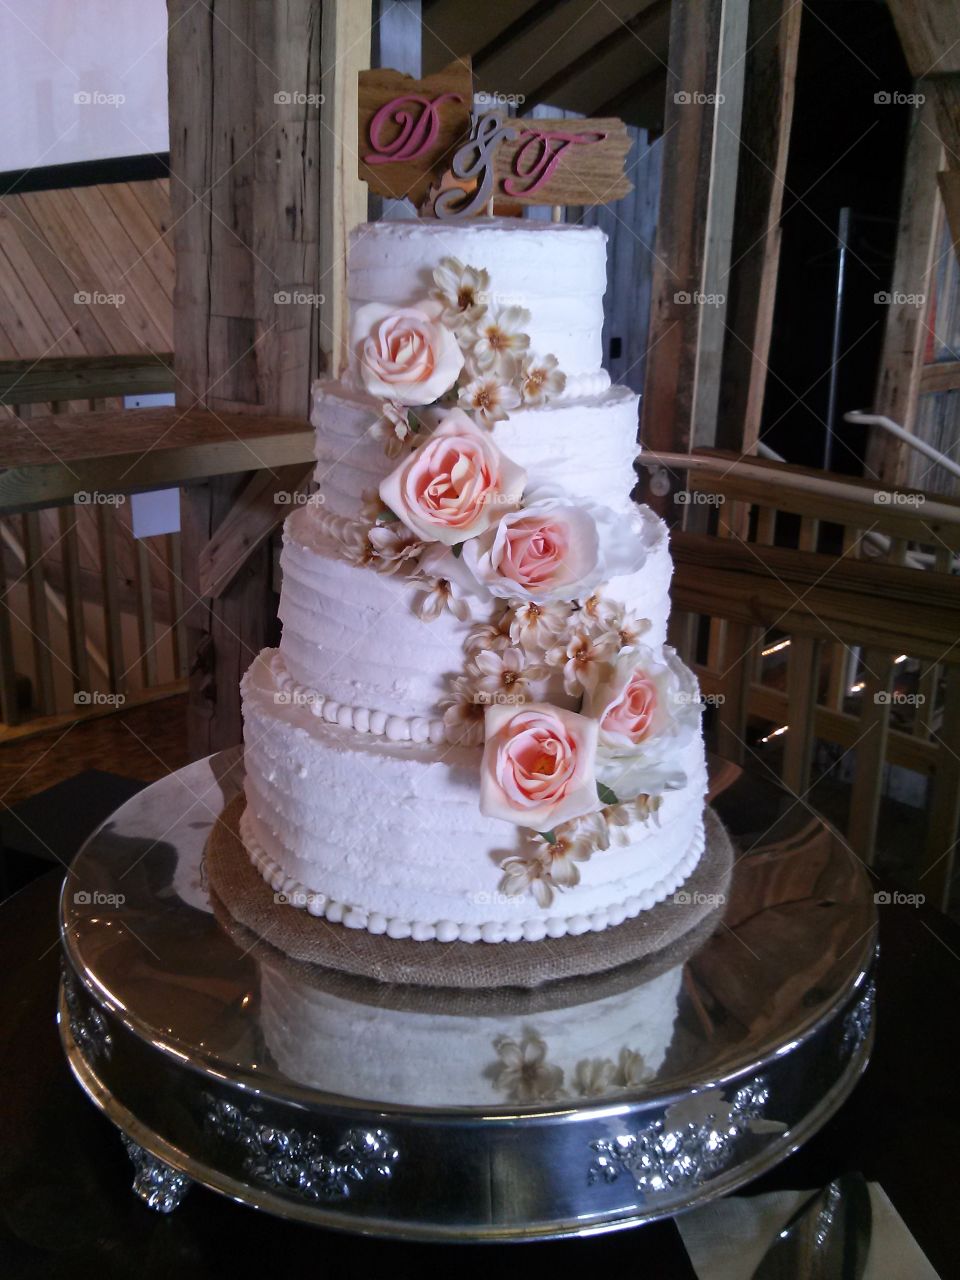 D&T Wedding! Congratulations!. Cake for the wedding! white cake made to look like dogwood, simple pink flowers with cream accent flowers wood top